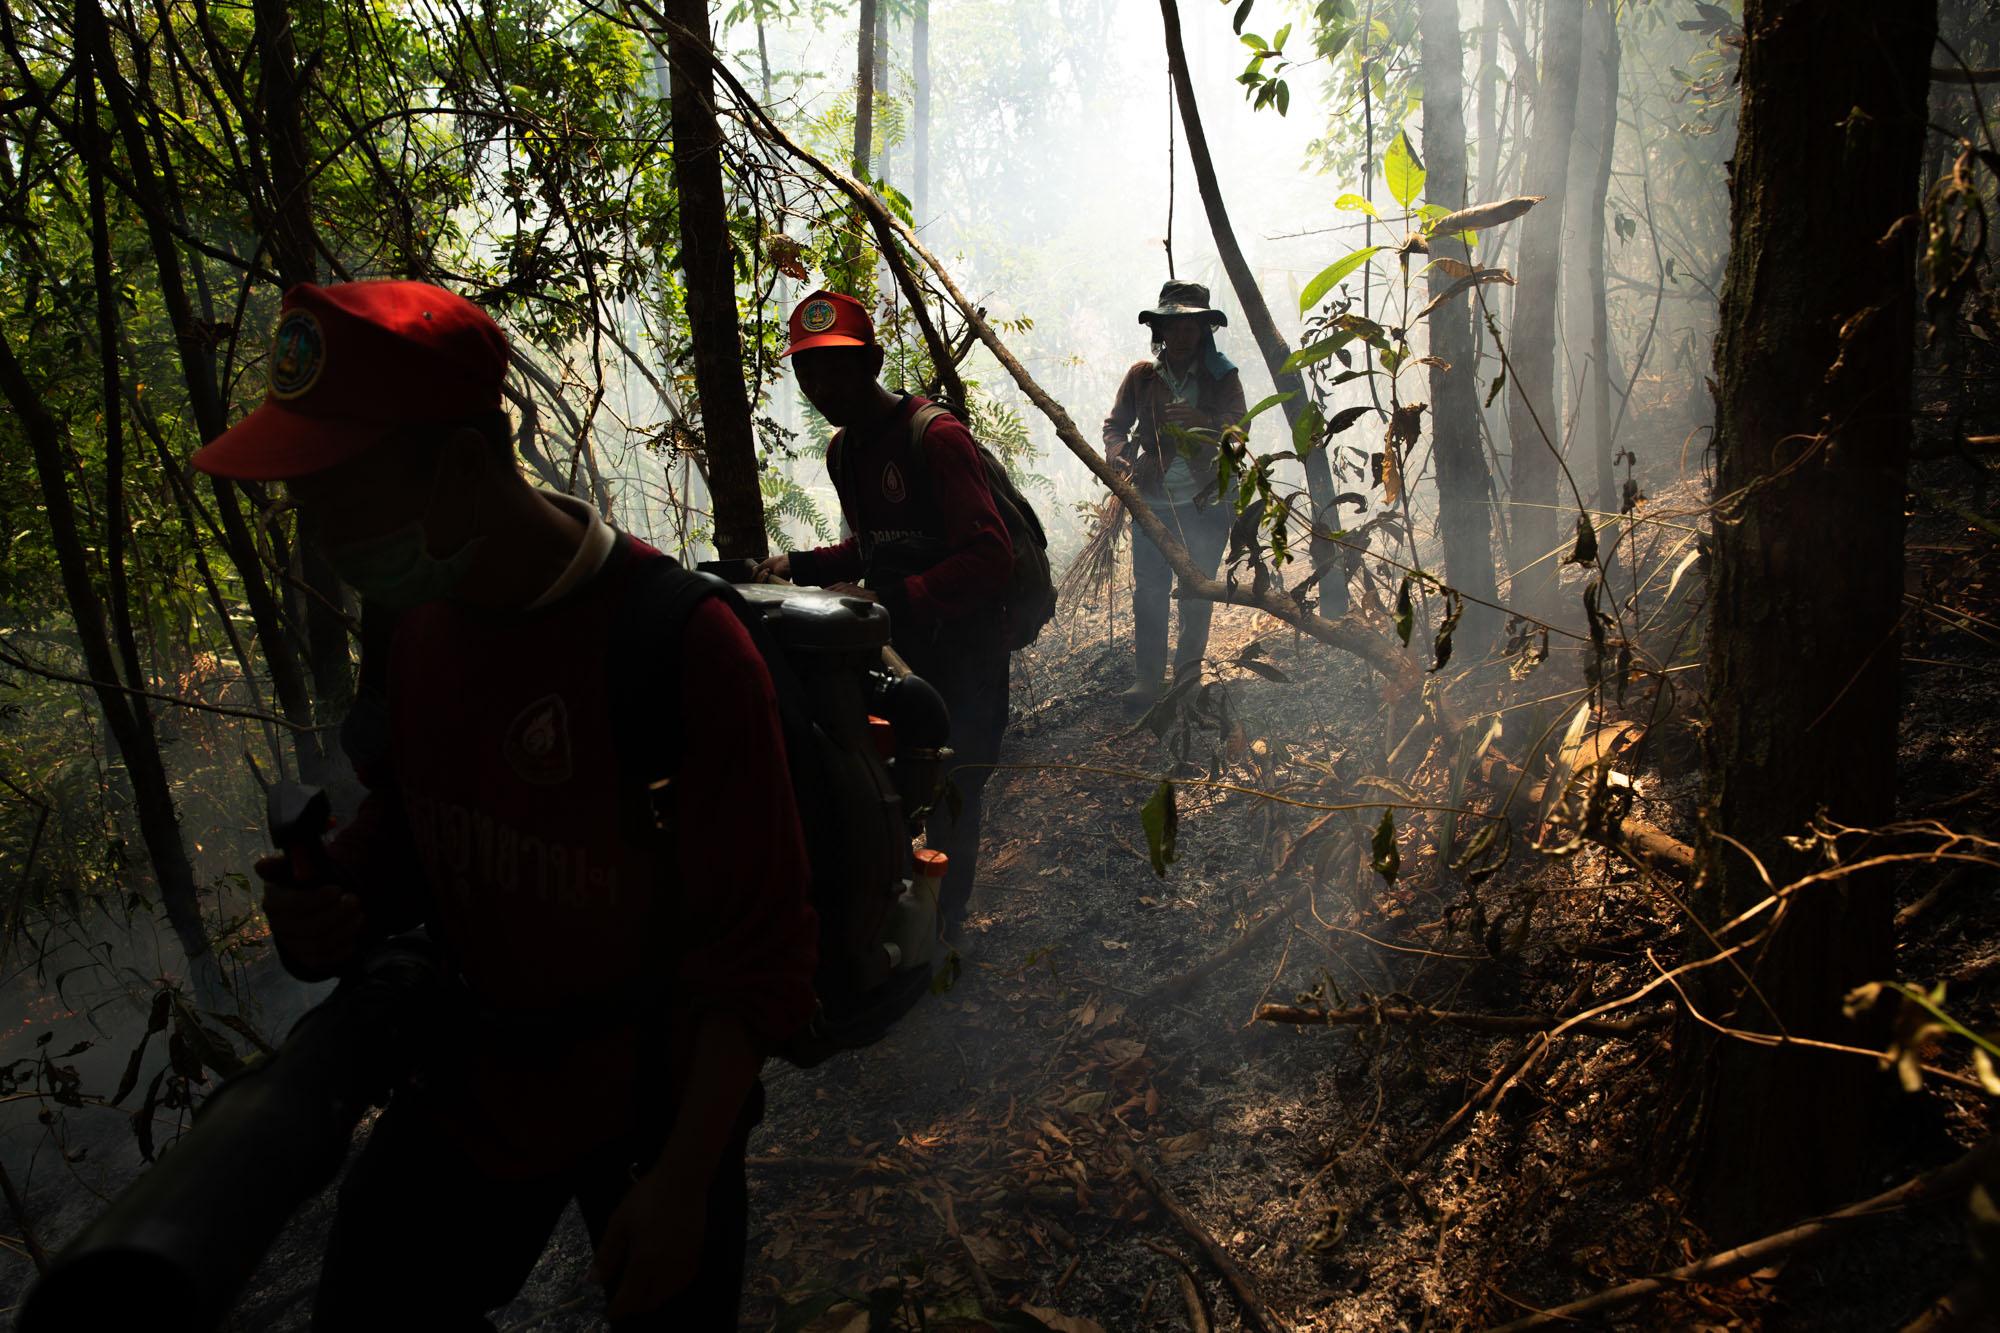 Fire fighters from Doi Mae Salong fire station make there way through a small fire, high up in the mountains, on their way to a much bigger blaze, April 2019.